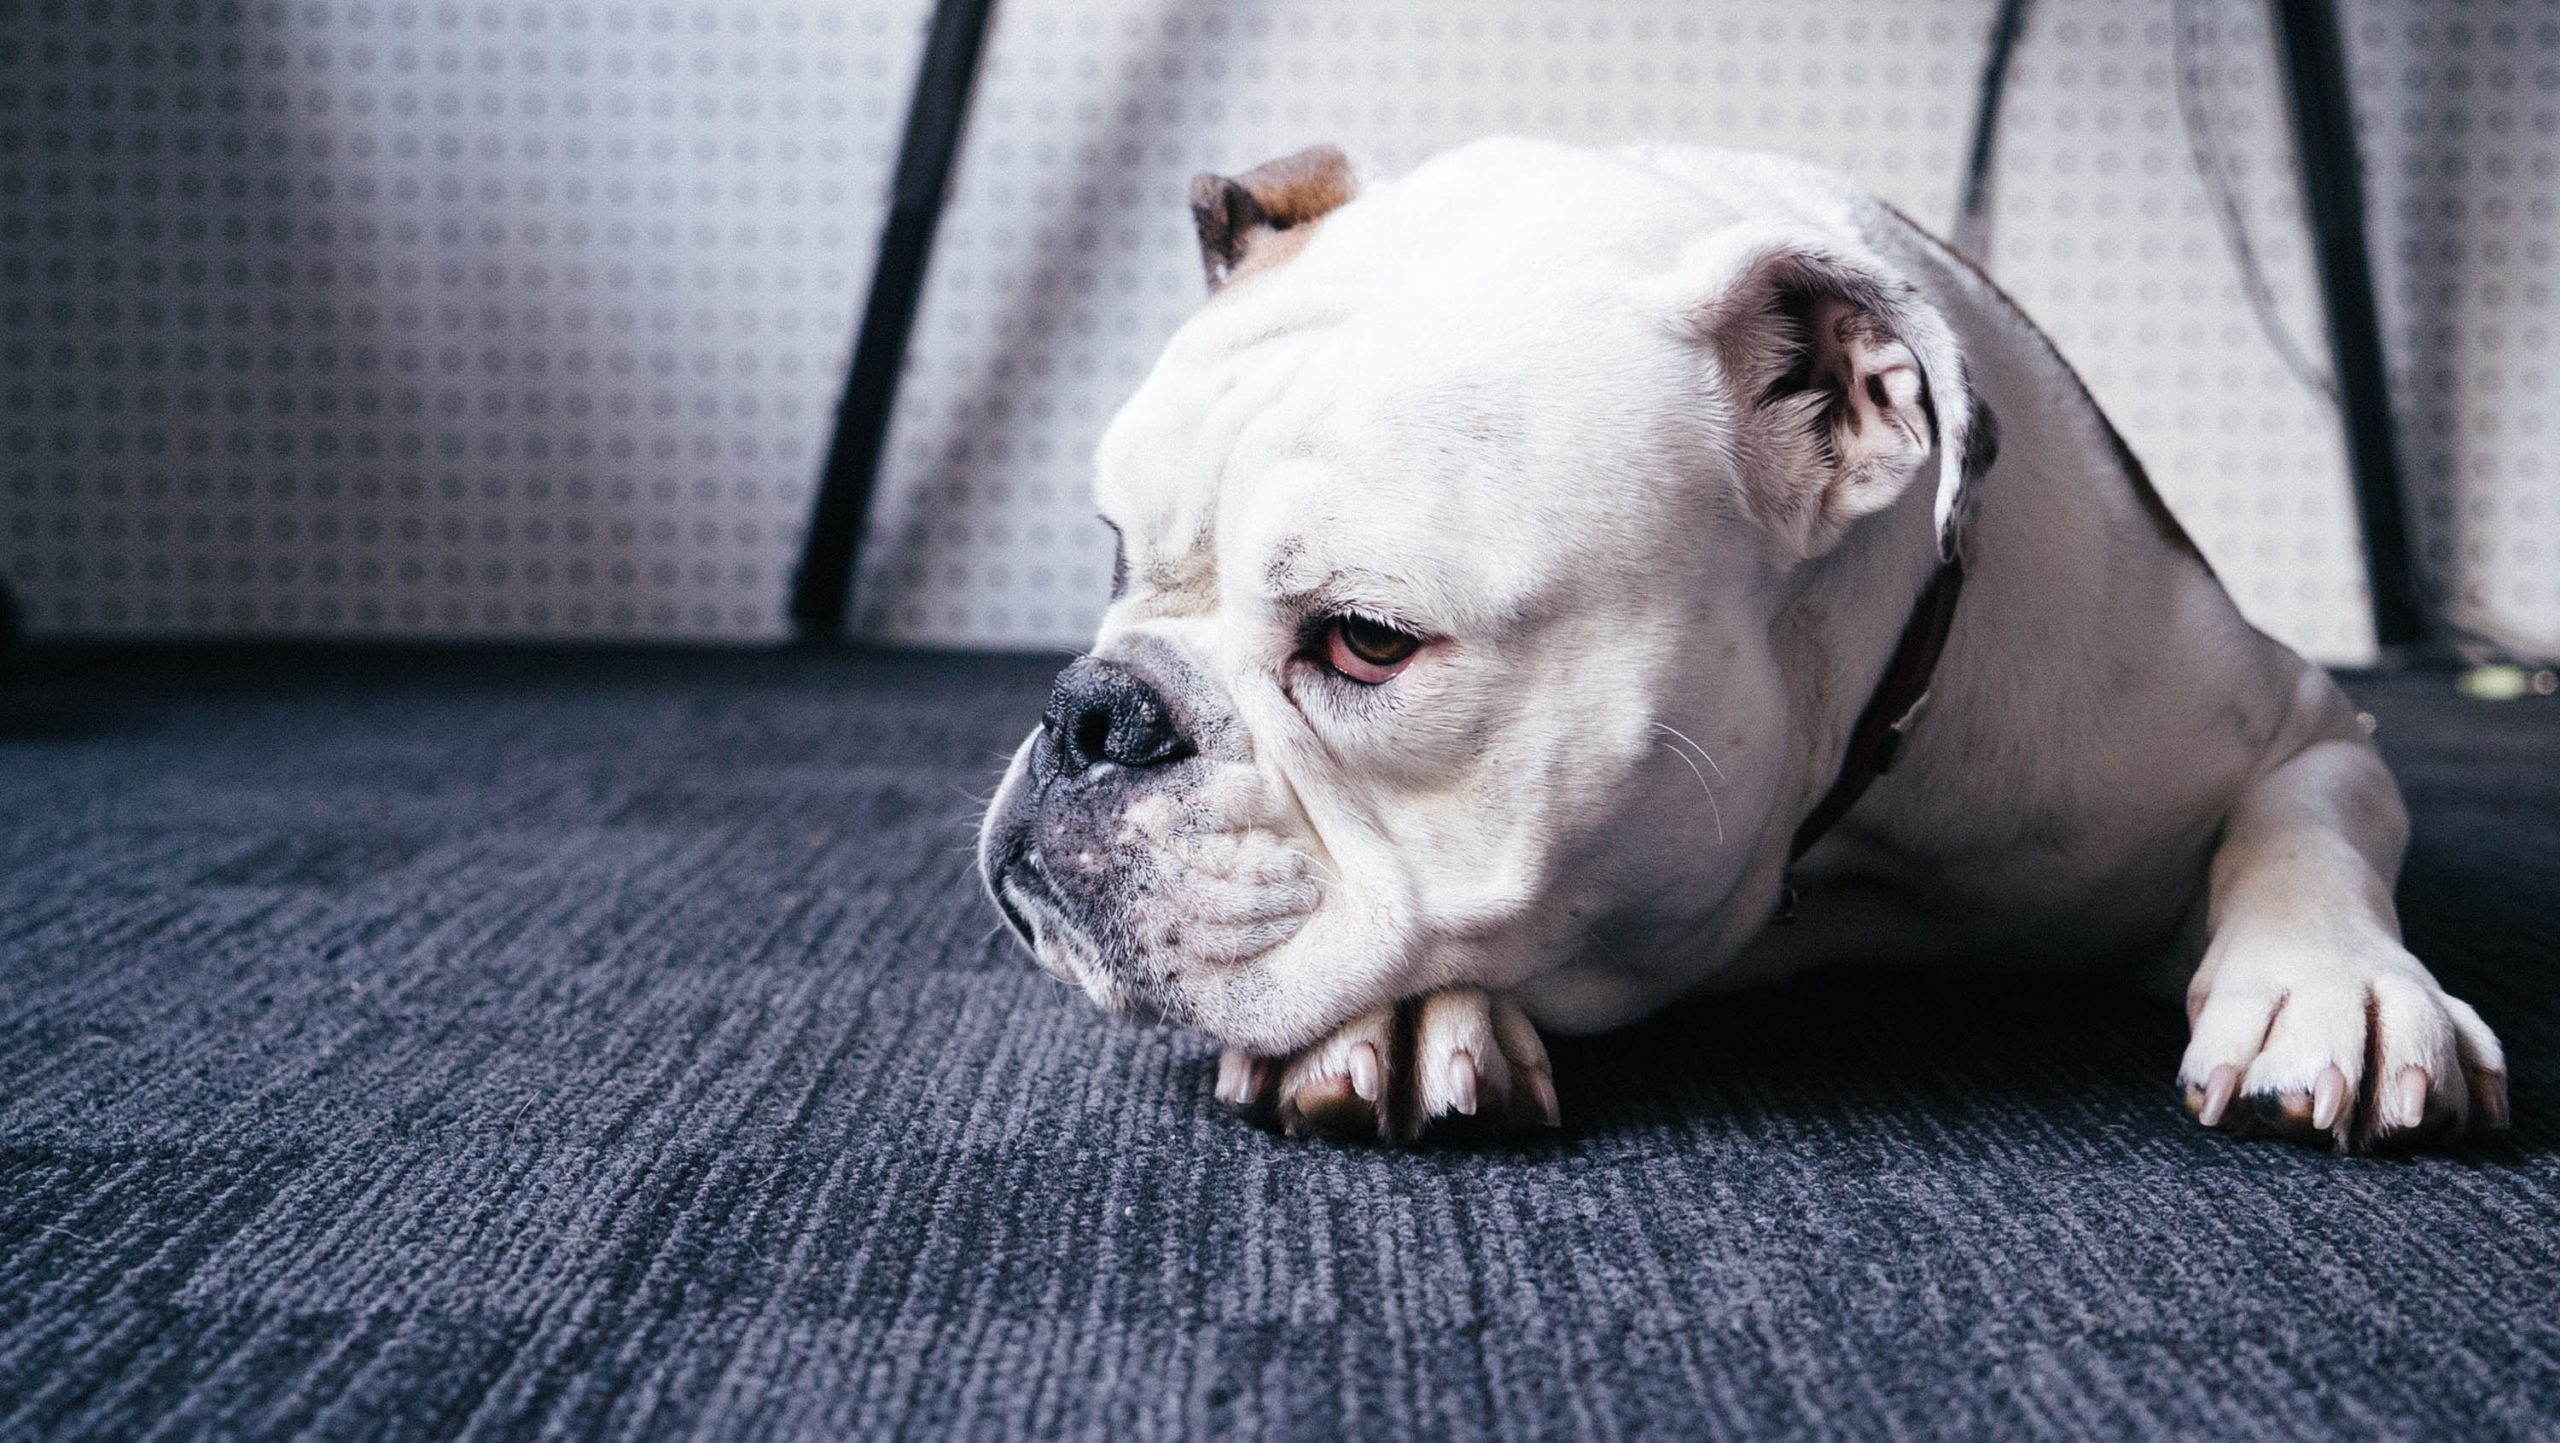 Some Useful Tips On Carpet Cleaning For Pet Owners